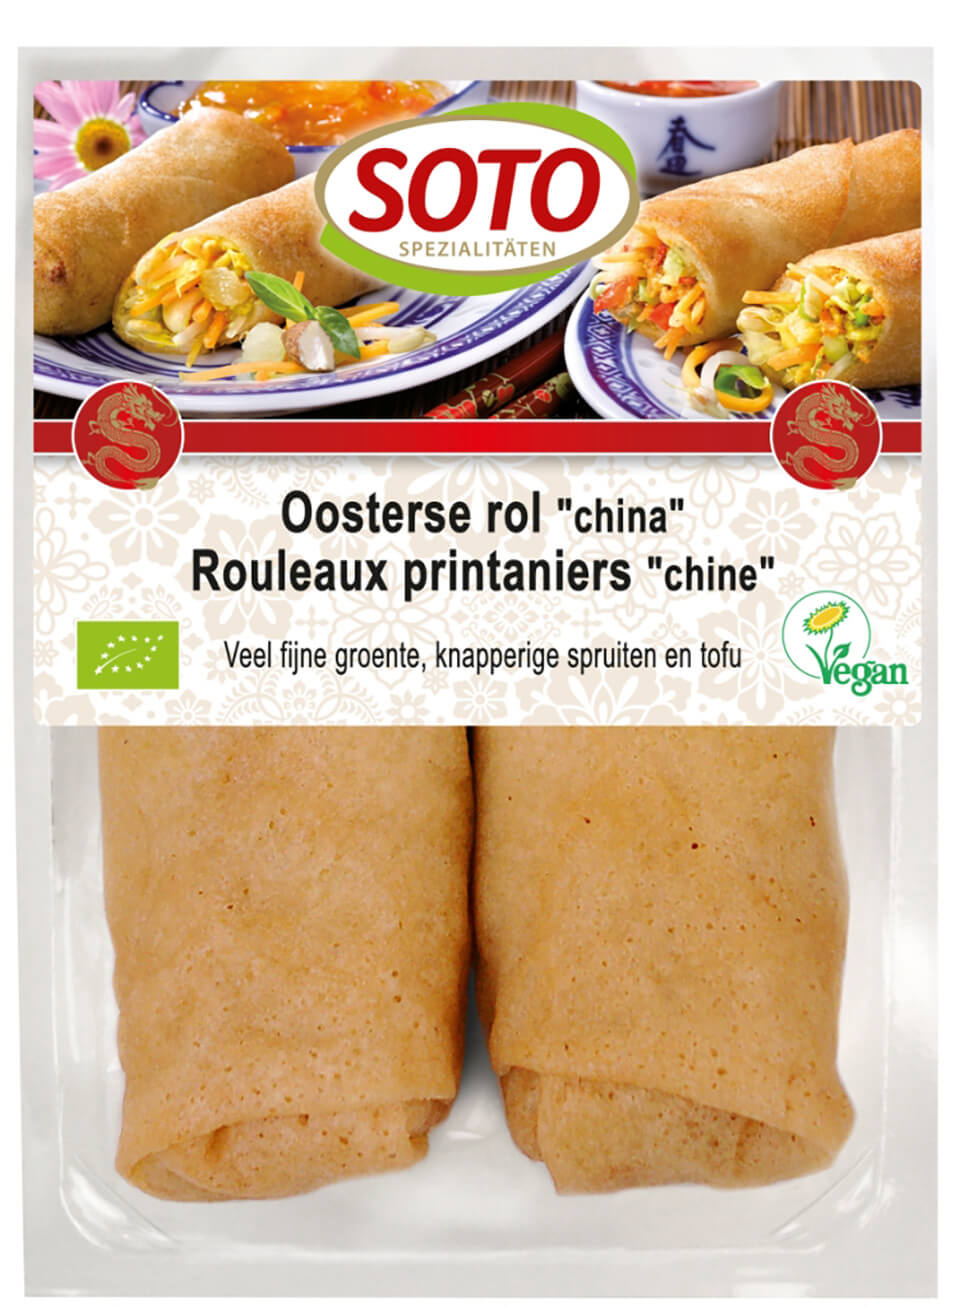 Soto Oosterse rol China bio 220g